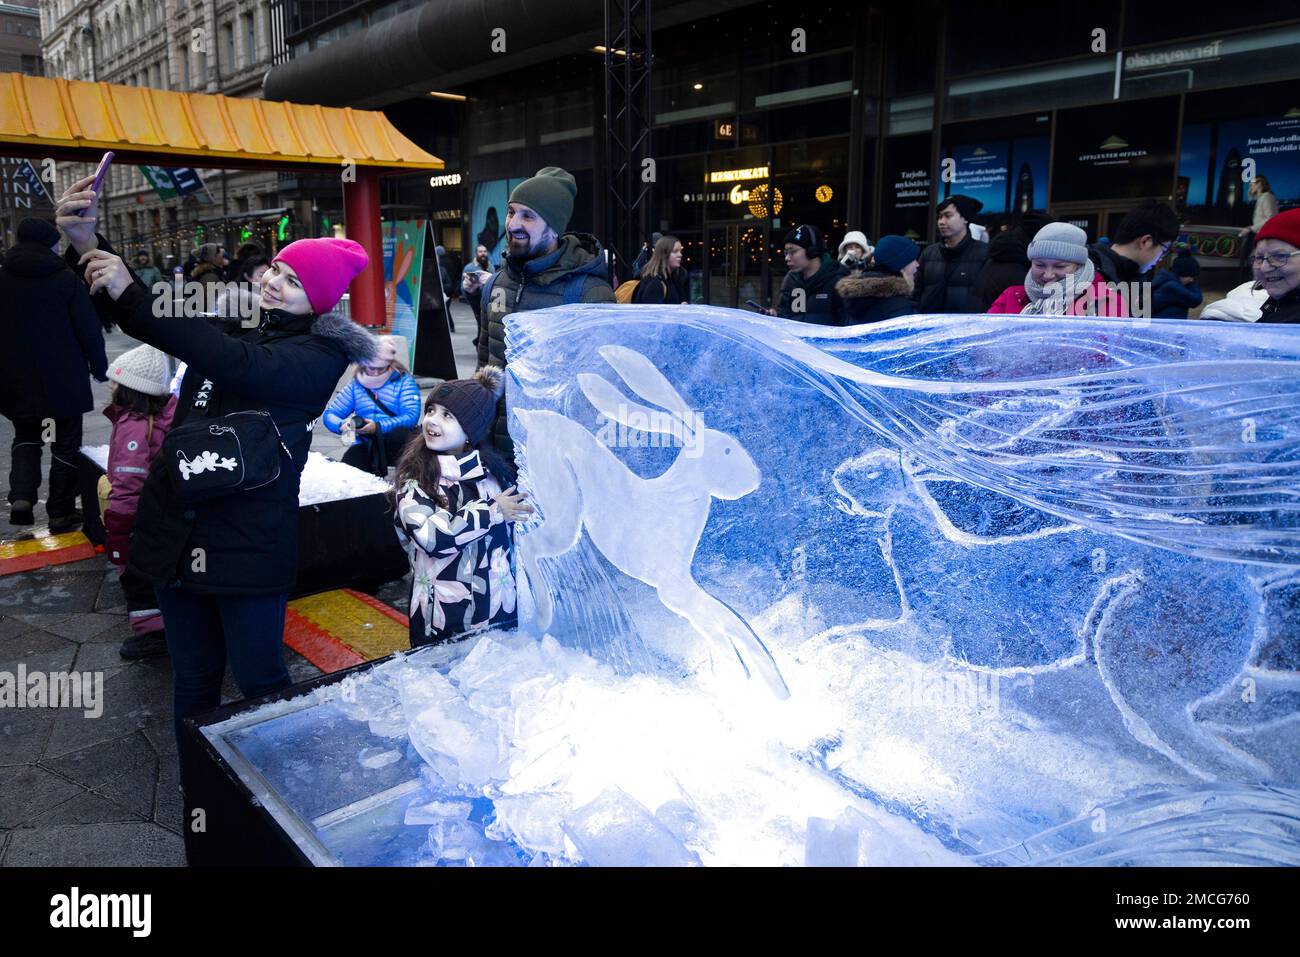 Helsinki, Finland. 21st Jan, 2023. People take a selfie with a rabbit-themed ice sculpture made in celebration of the Chinese New Year in Helsinki, Finland, Jan. 21, 2023. Credit: Matti Matikainen/Xinhua/Alamy Live News Stock Photo